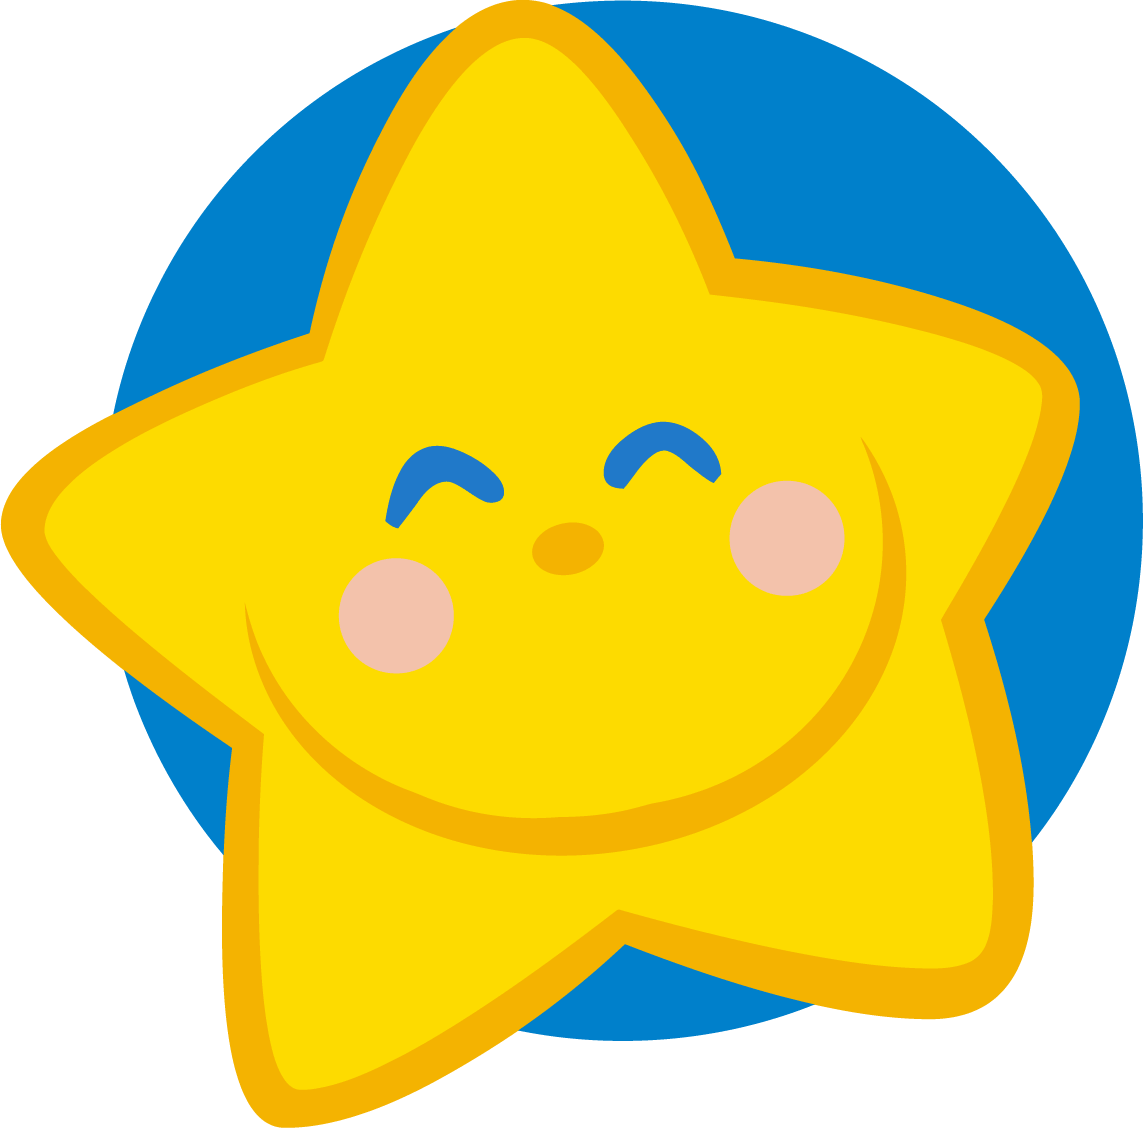 Cartoon Picture Of A Star Frees That You Can Download To Clipart 